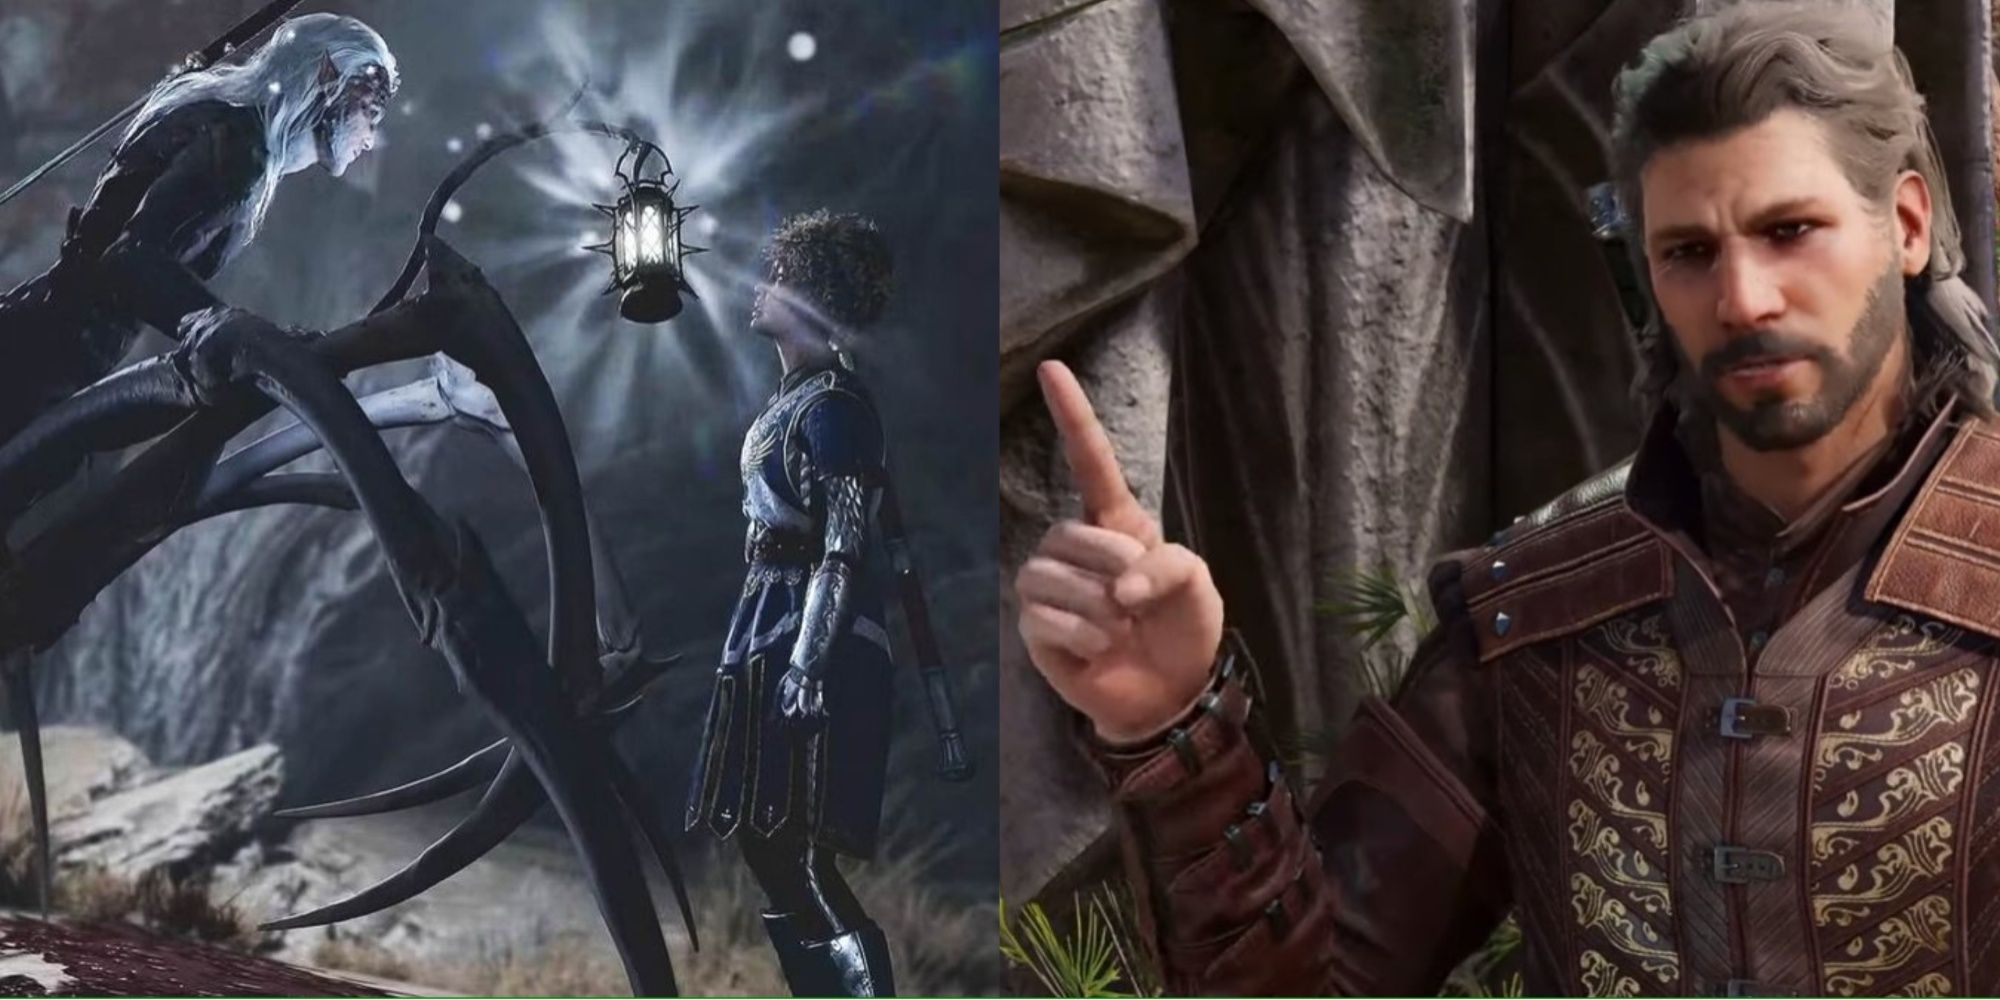 Split image showing gale holding up a finger and a drider looking down on a custom character in baldur's gate 3 